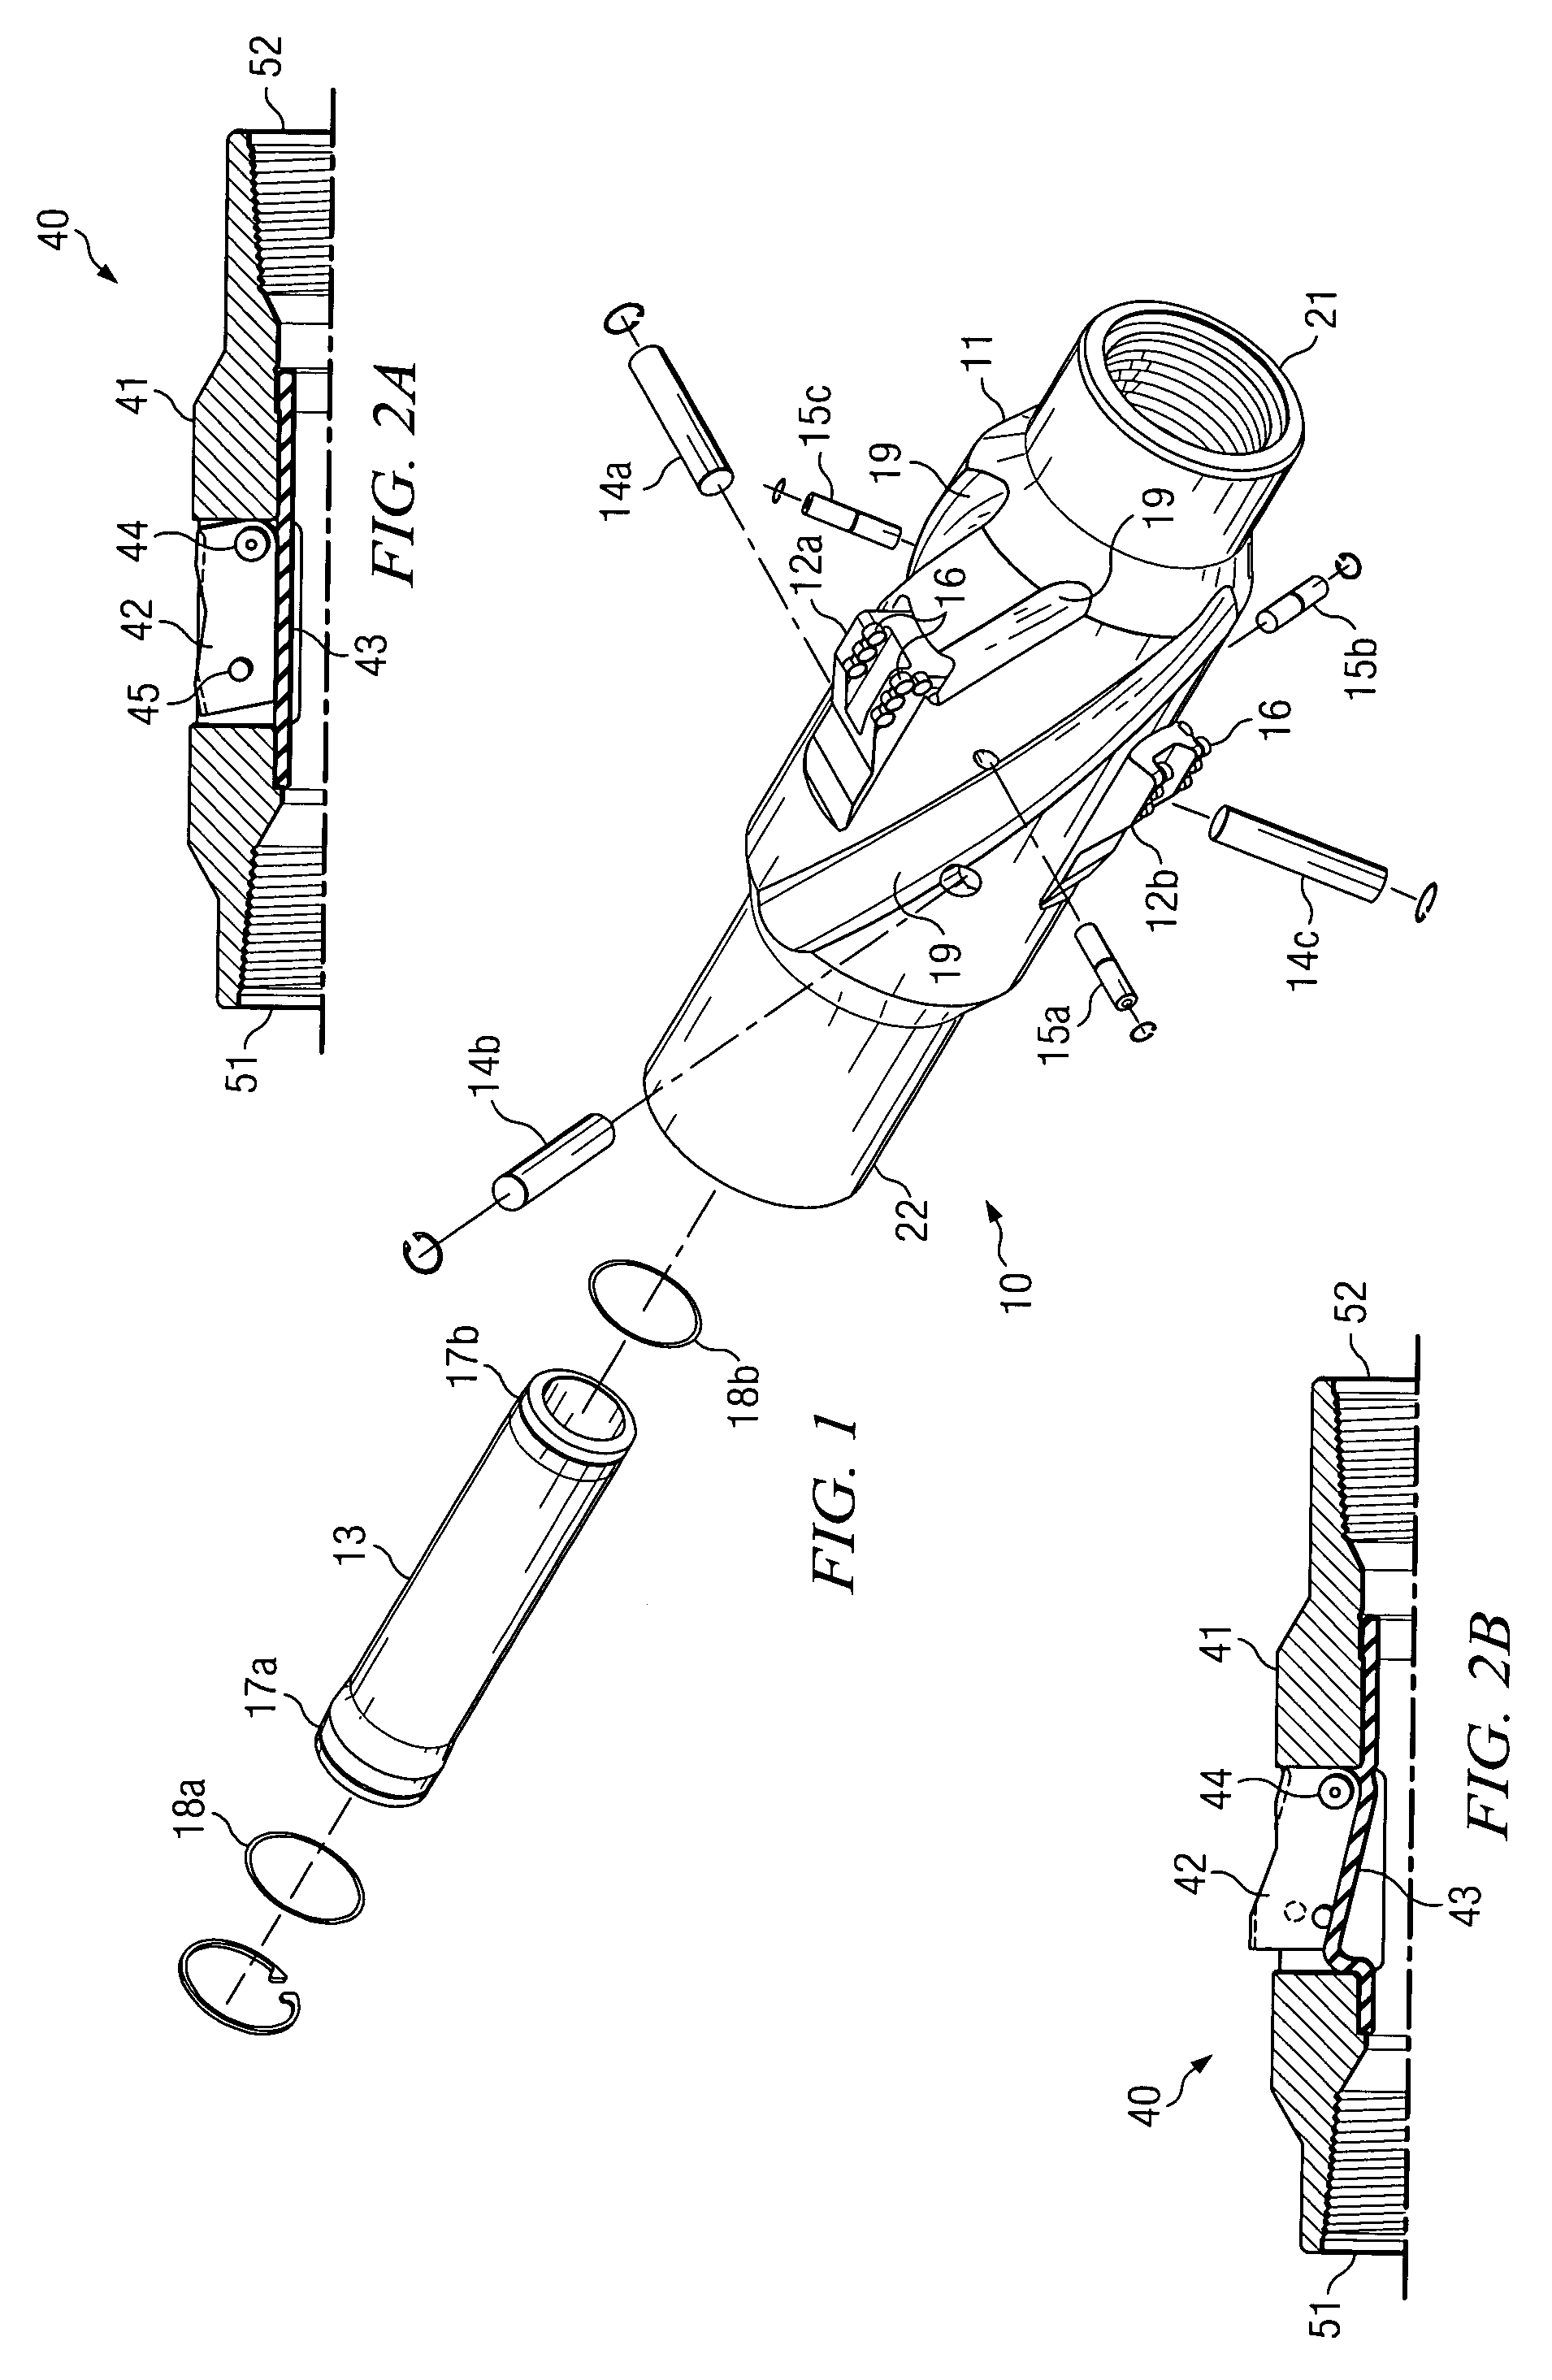 Drilling tool having an expandable bladder and method for using same